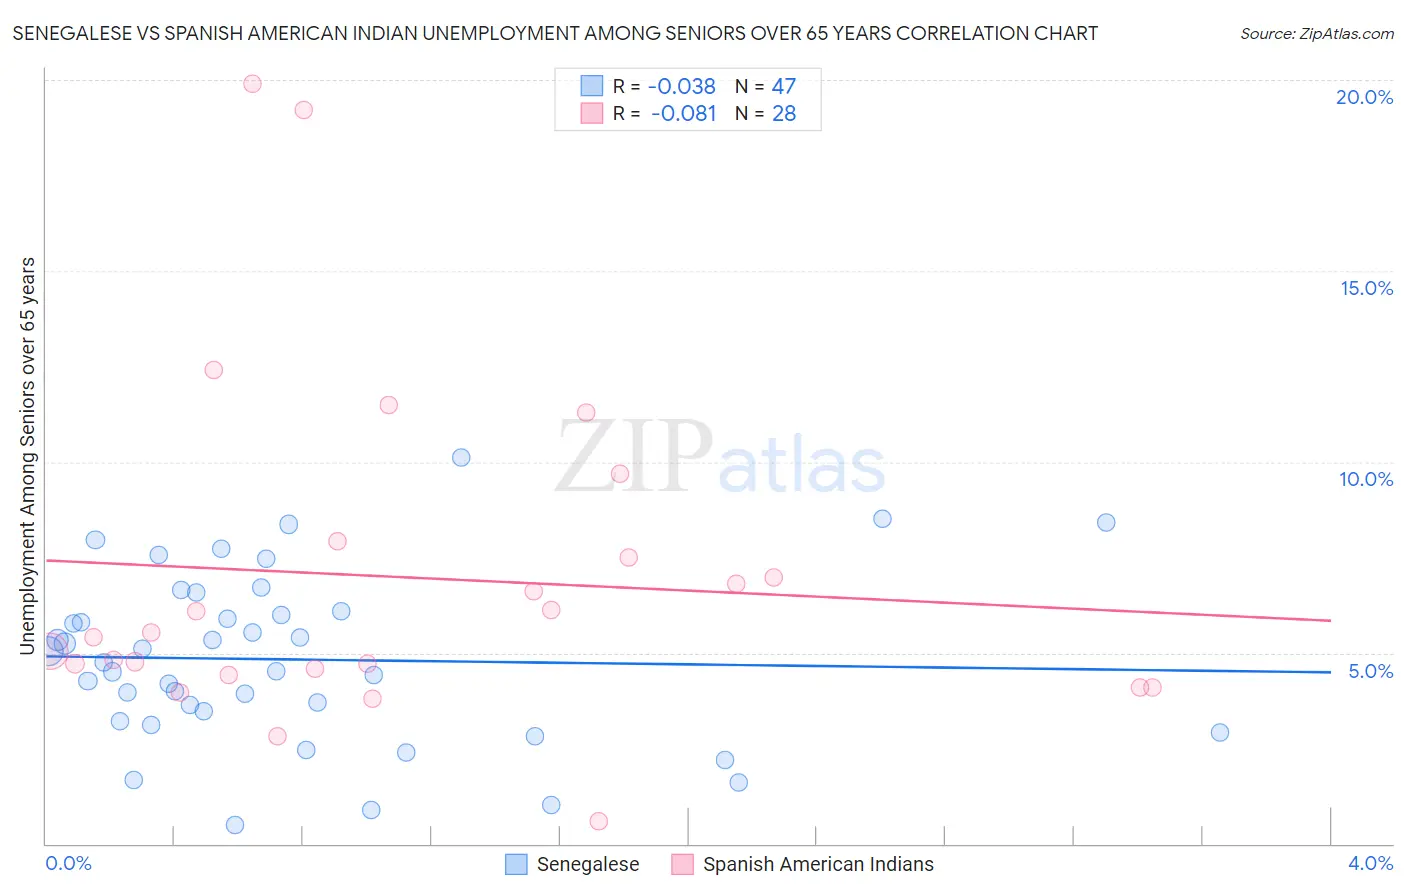 Senegalese vs Spanish American Indian Unemployment Among Seniors over 65 years